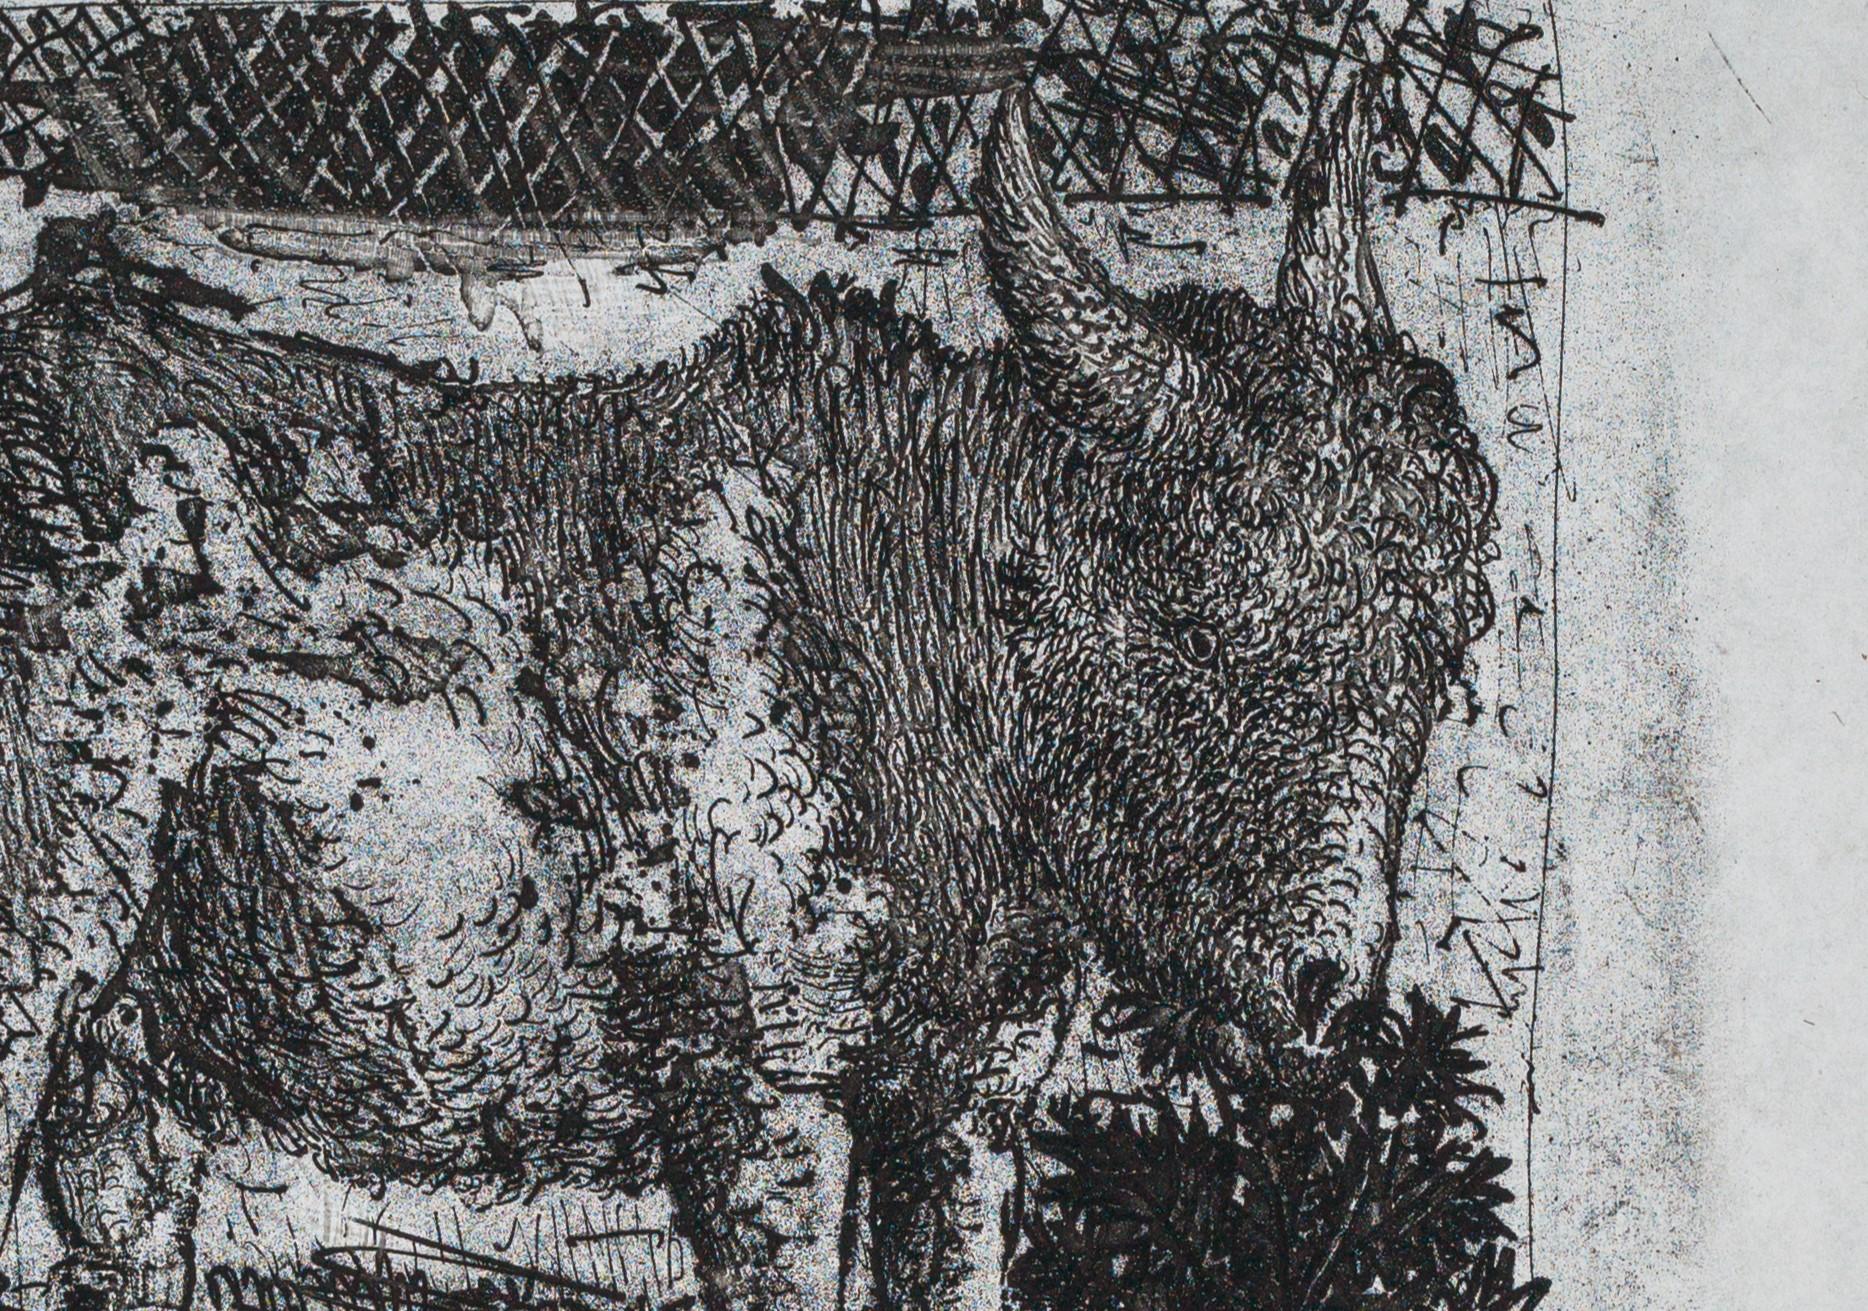 The Donkey is an aquatint and drypoint print on chine from one of the deluxe copies of Picasso's 1942 Histoire Naturelle - Textes de Buffon series. The image size is 10.5 x 8 inches, unsigned as issued, and framed in a contemporary silver and gray